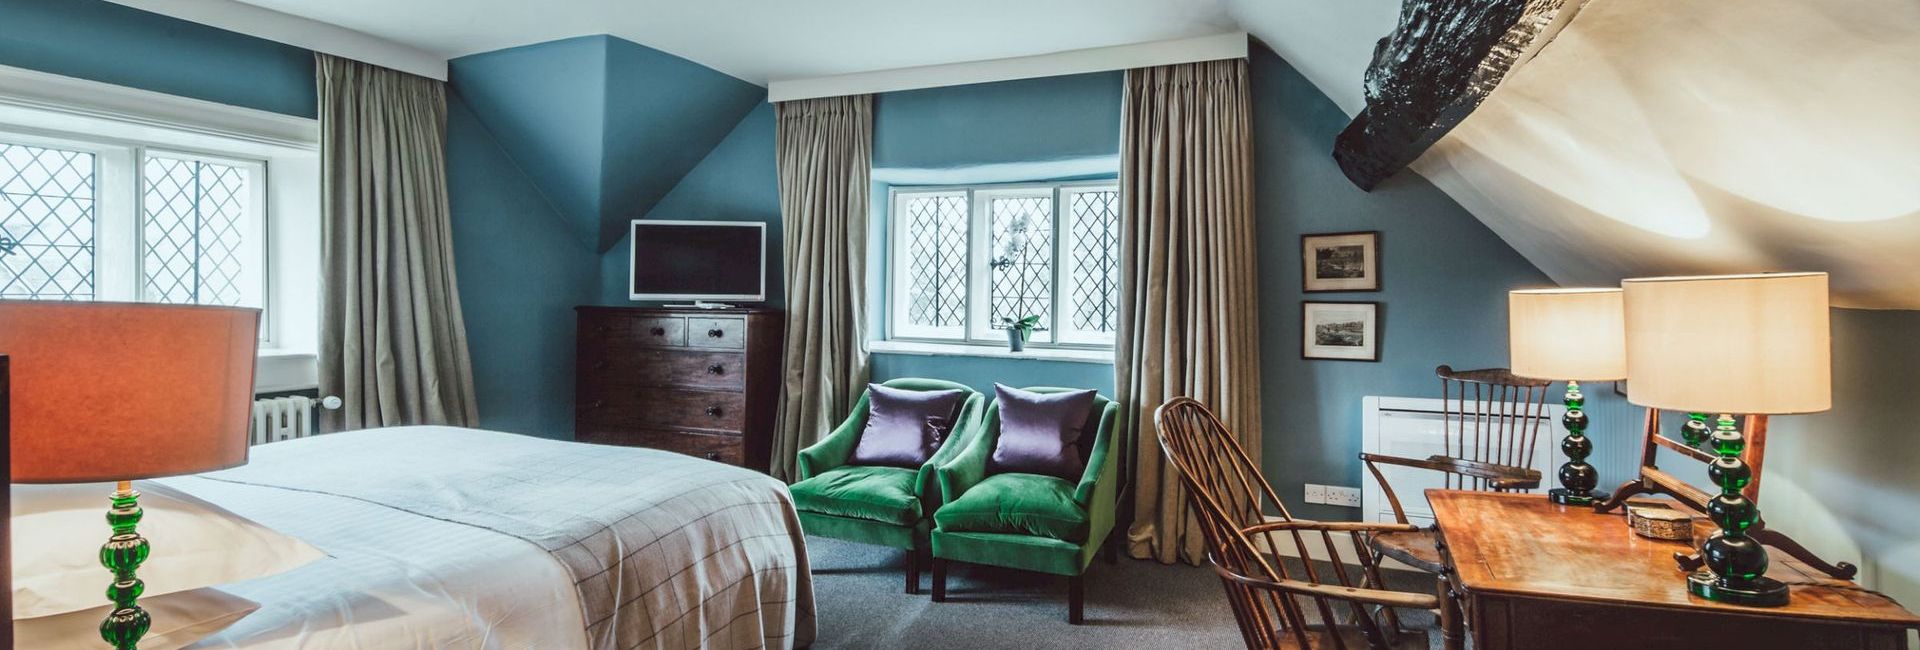 Room at The Peacock at Rowsley, Derbyshire